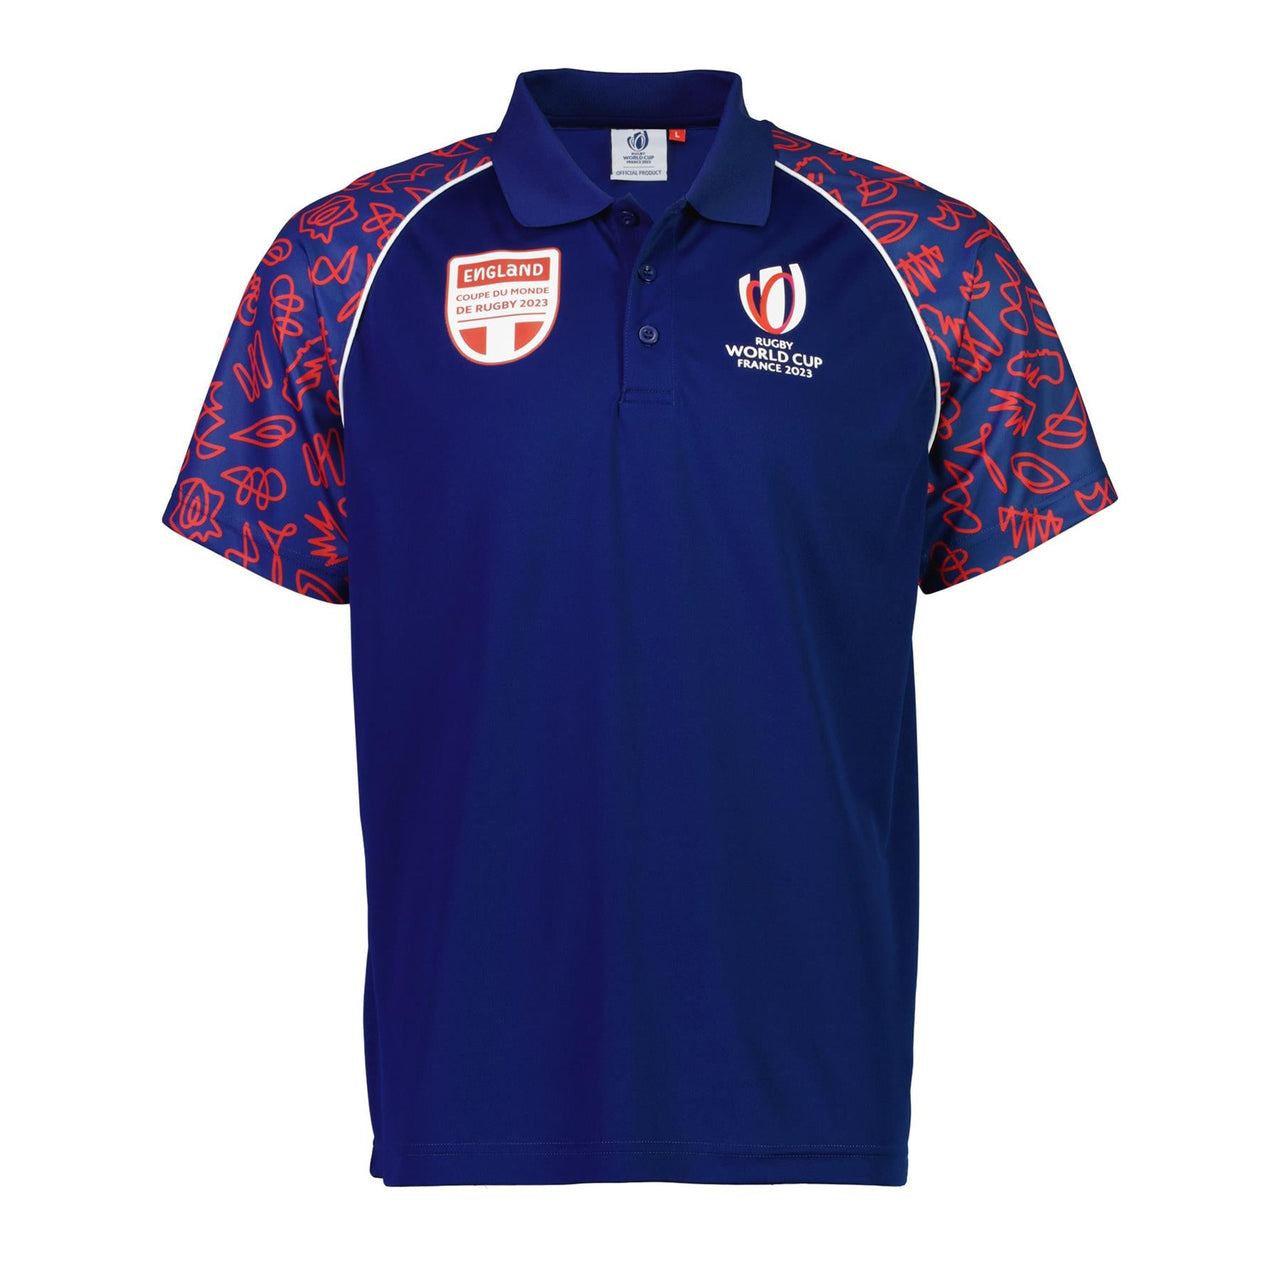 England Rugby World Cup 2023 Men's Polo Shirt